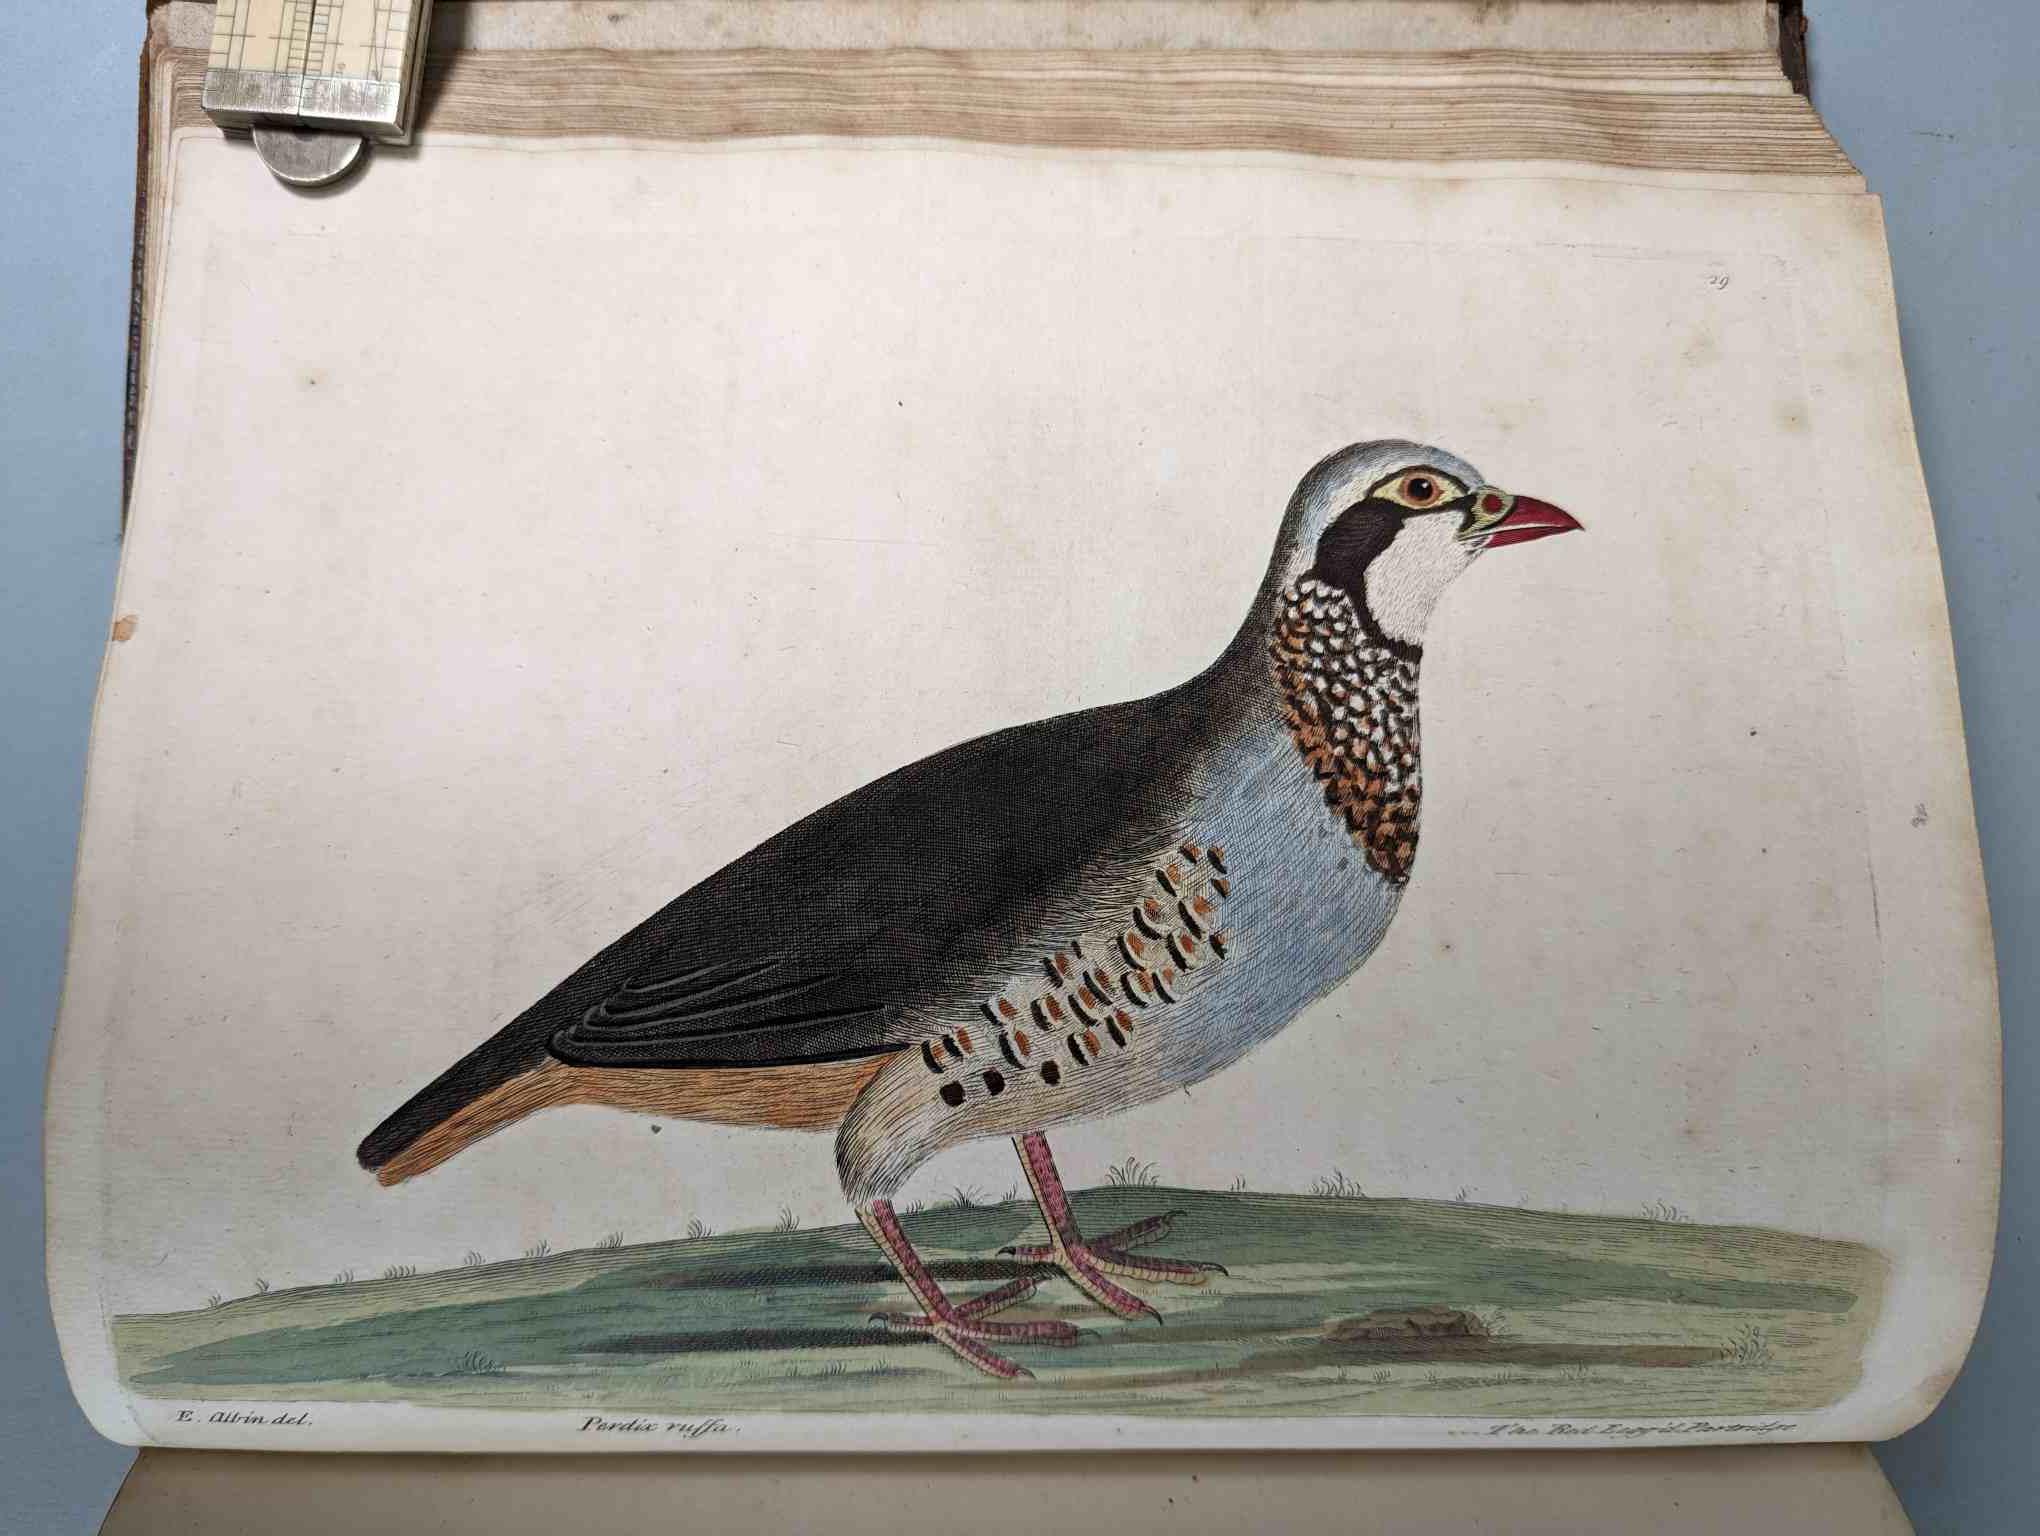 ALBIN, Eleazar. A Natural History of Birds, to which are added, Notes and Observations by W. - Image 32 of 208